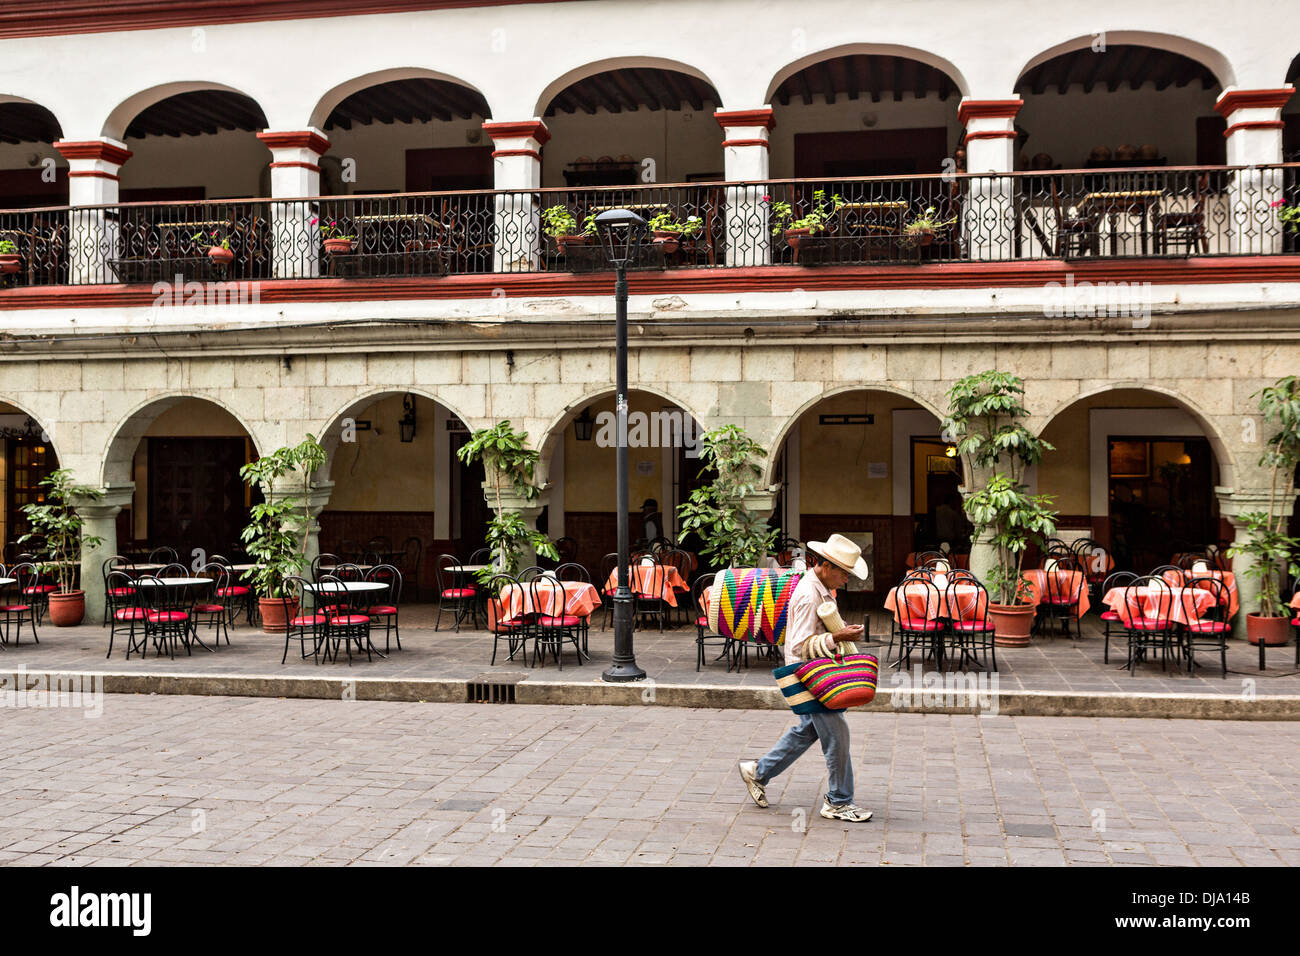 Early morning in the historic Zocalo or plaza in Oaxaca, Mexico. Stock Photo